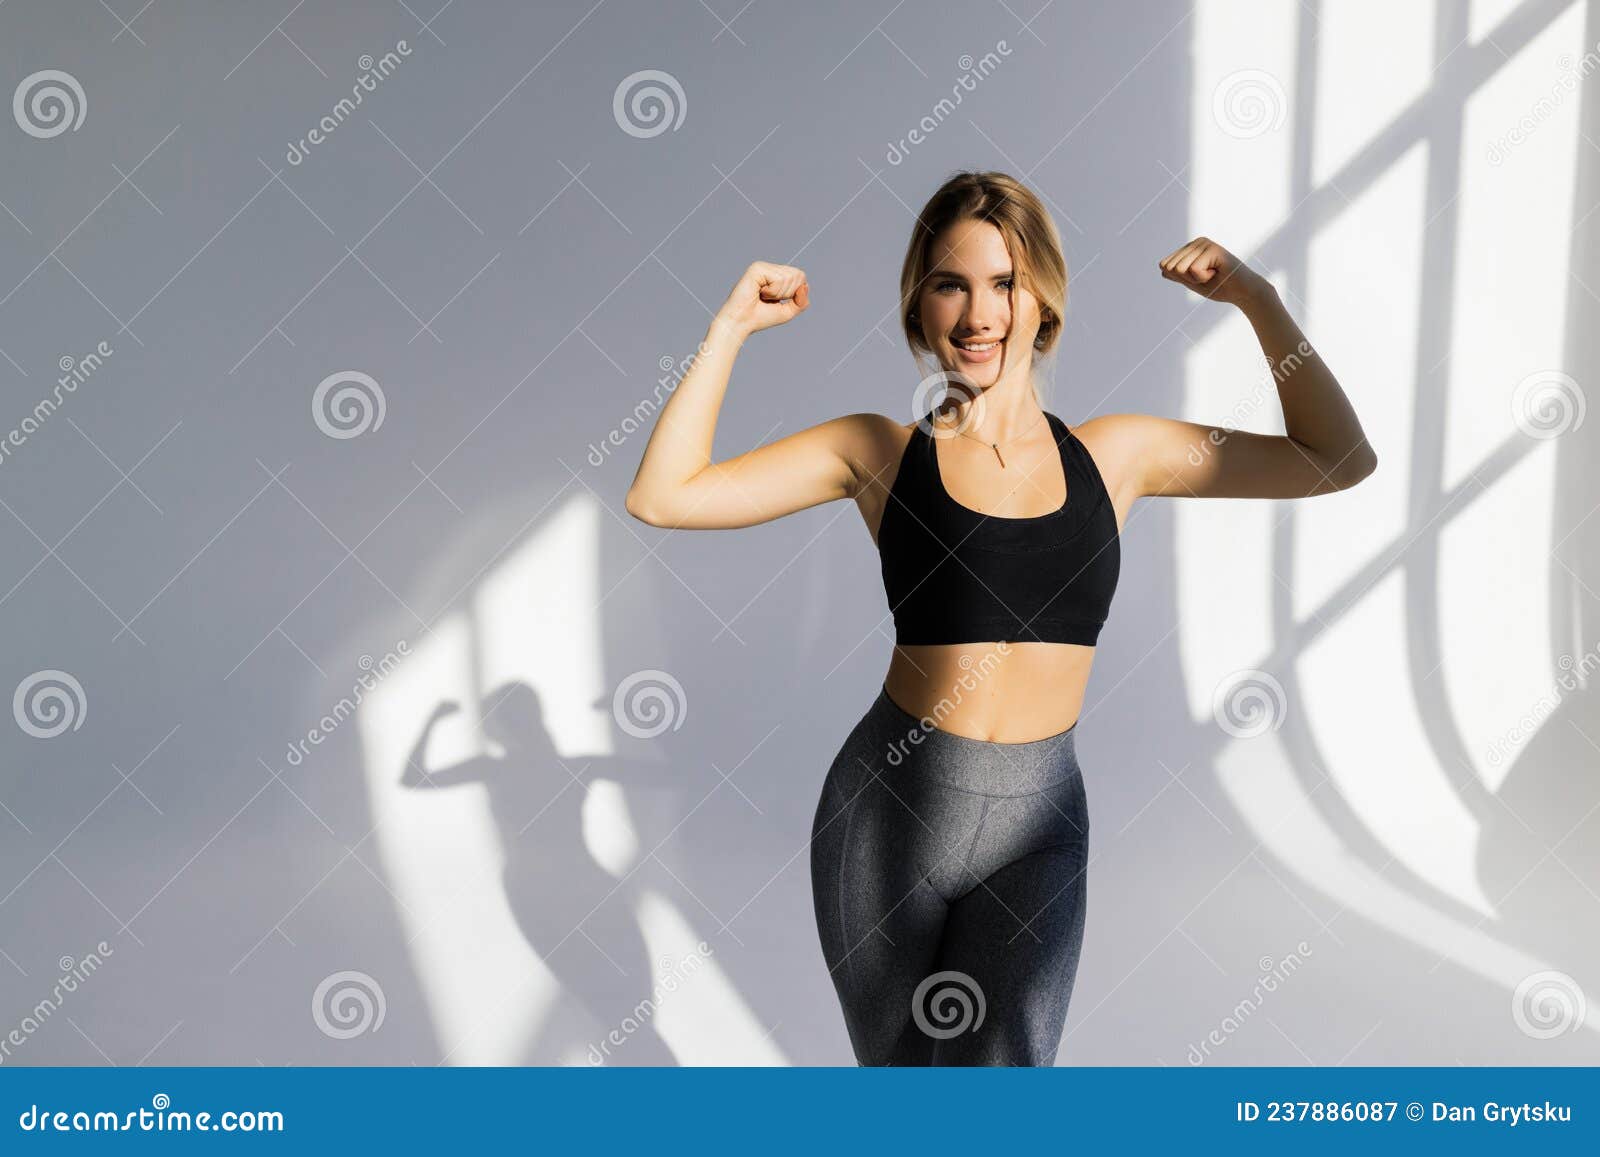 Strong Beautiful Fitness Woman Flexing Her Arm and Back Muscles